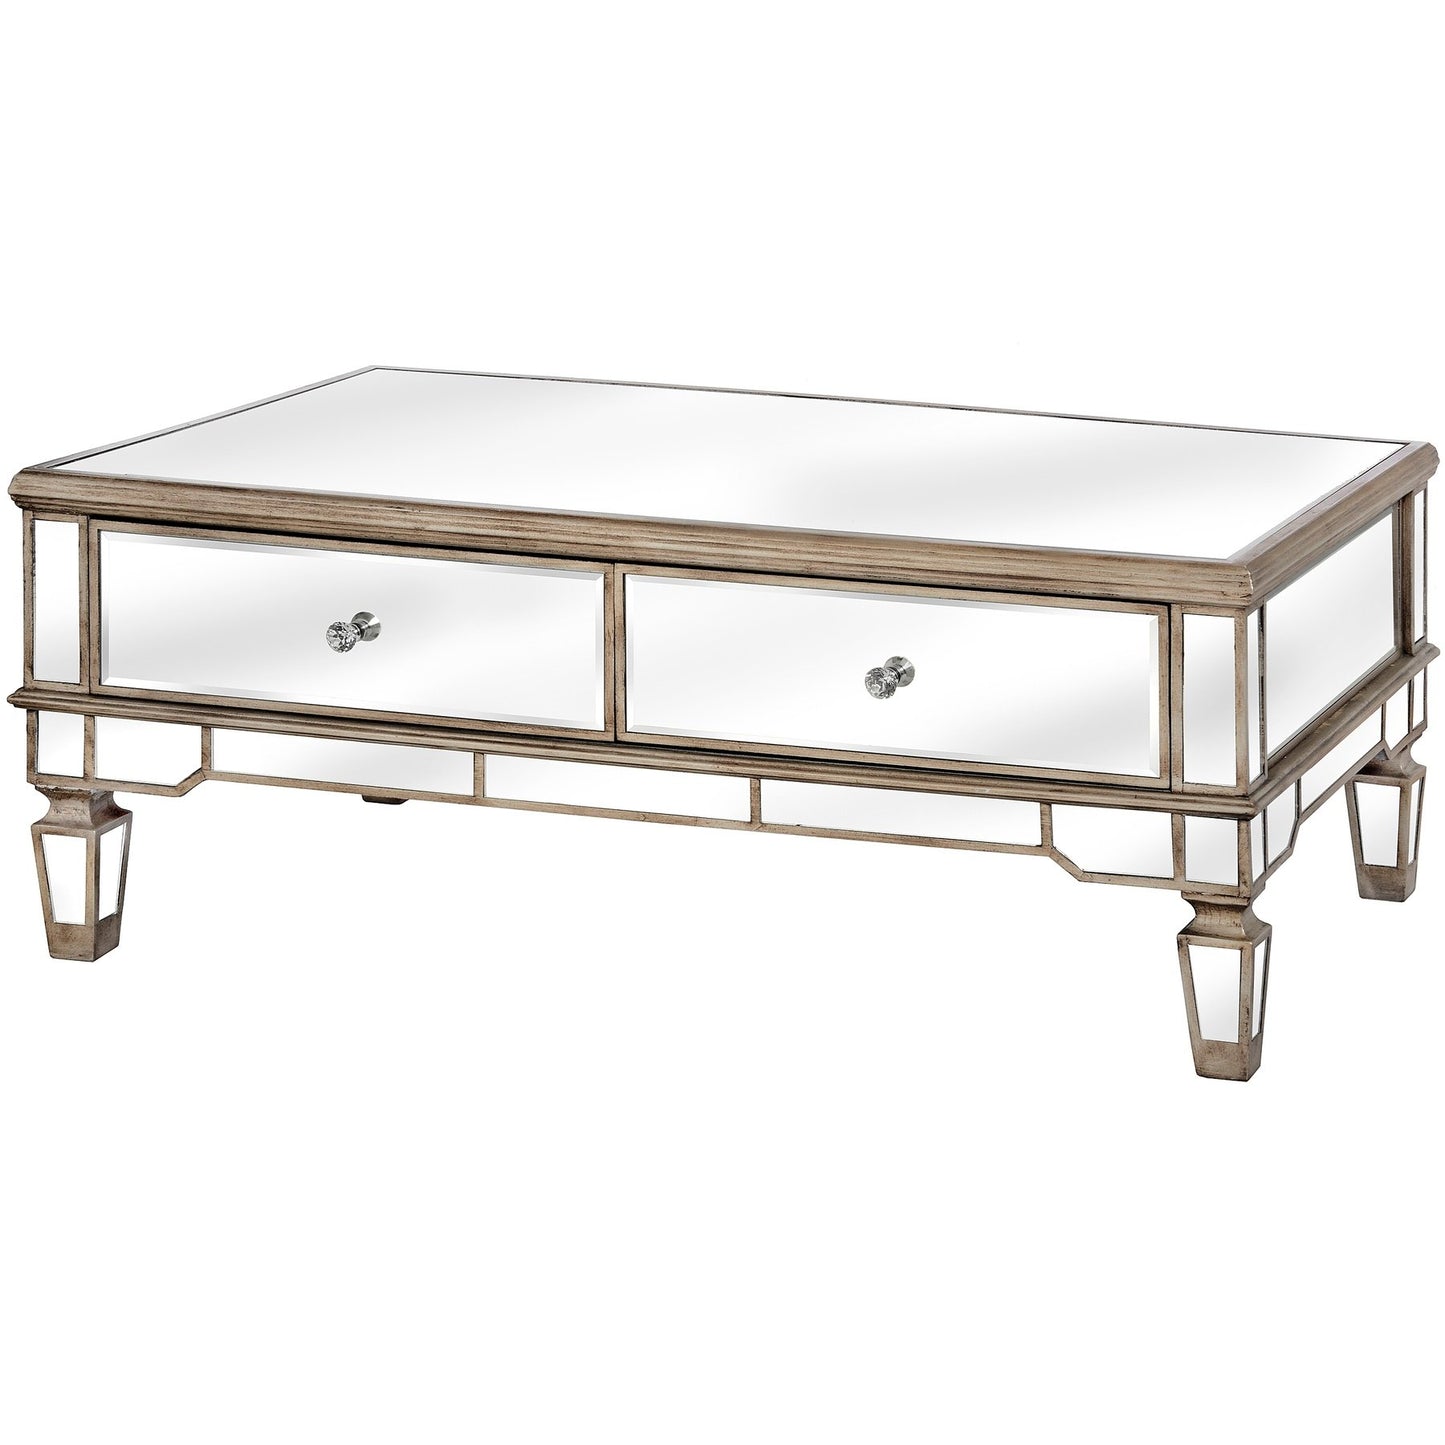 The Belfry Collection Mirrored Coffee Table